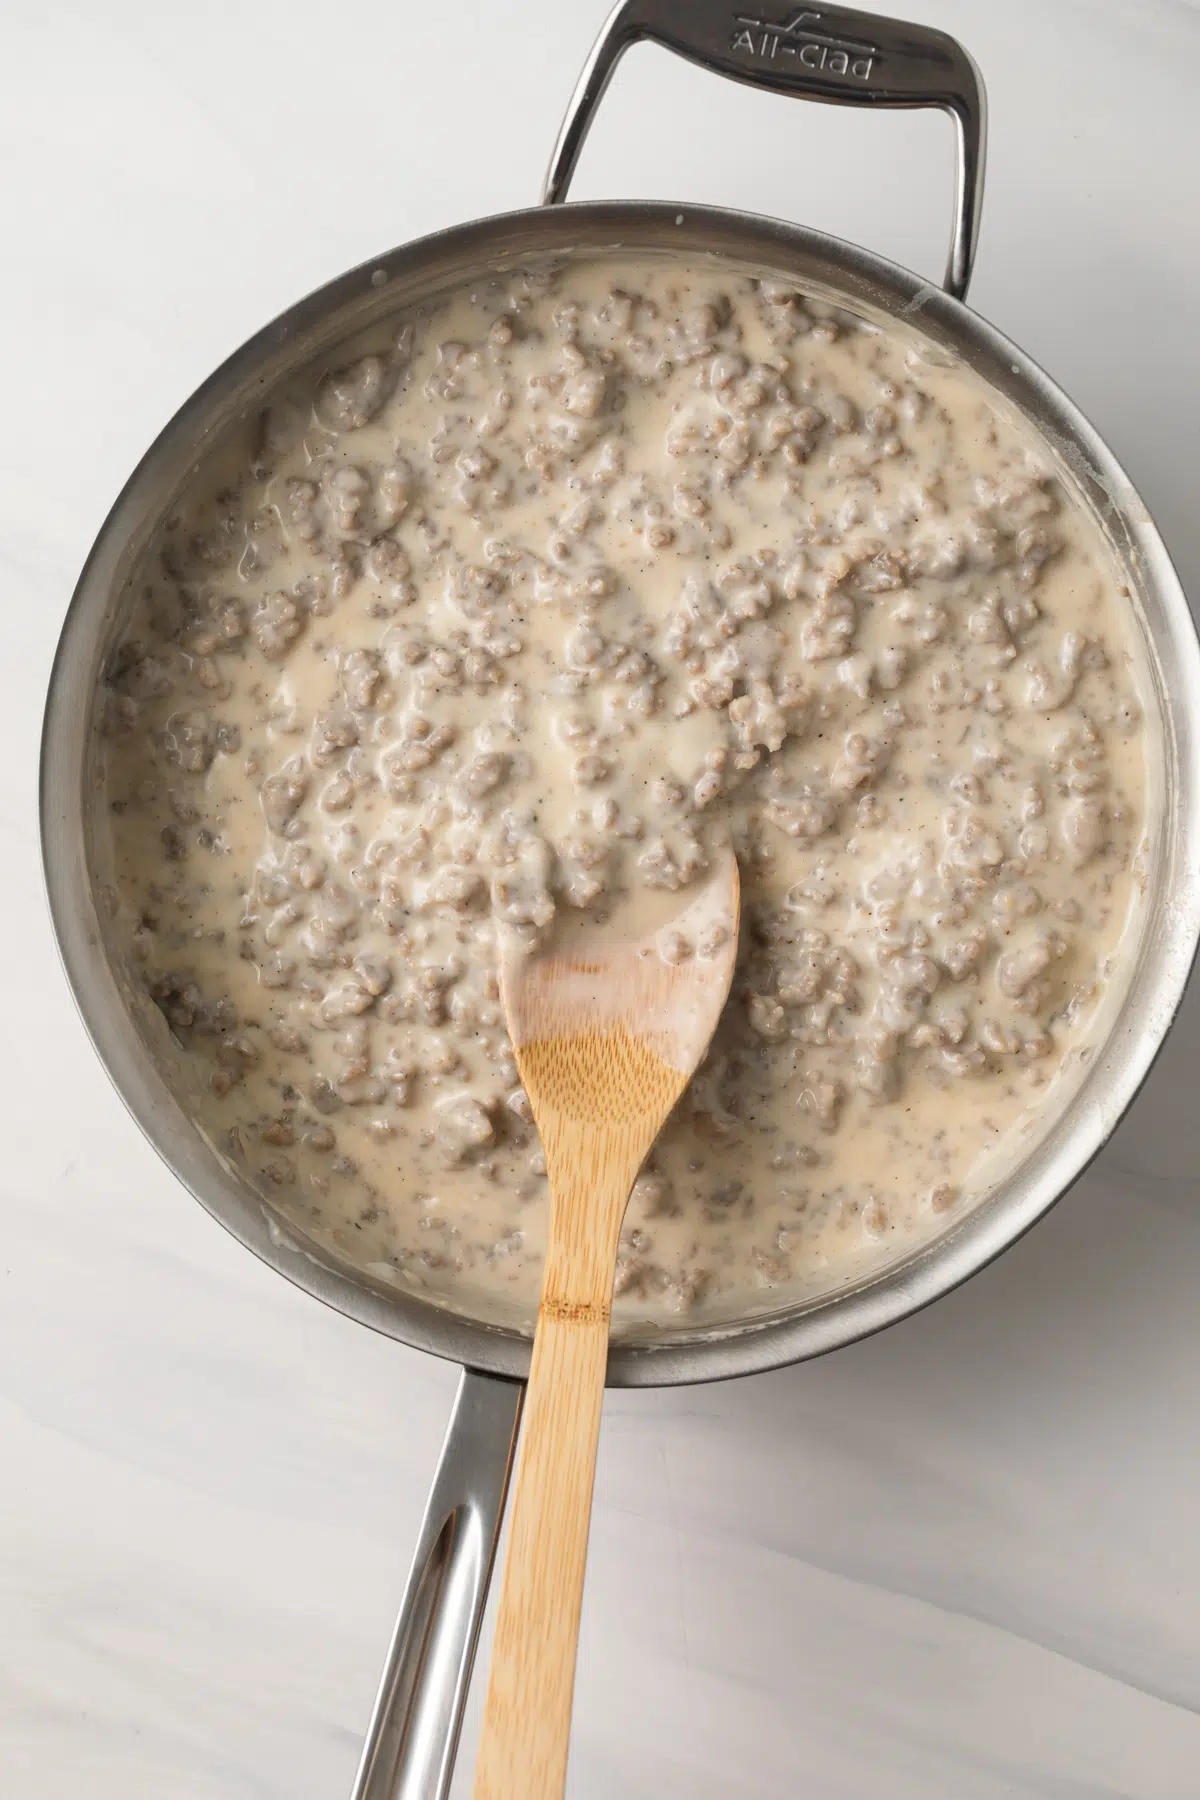 Sausage gravy in a large skillet.